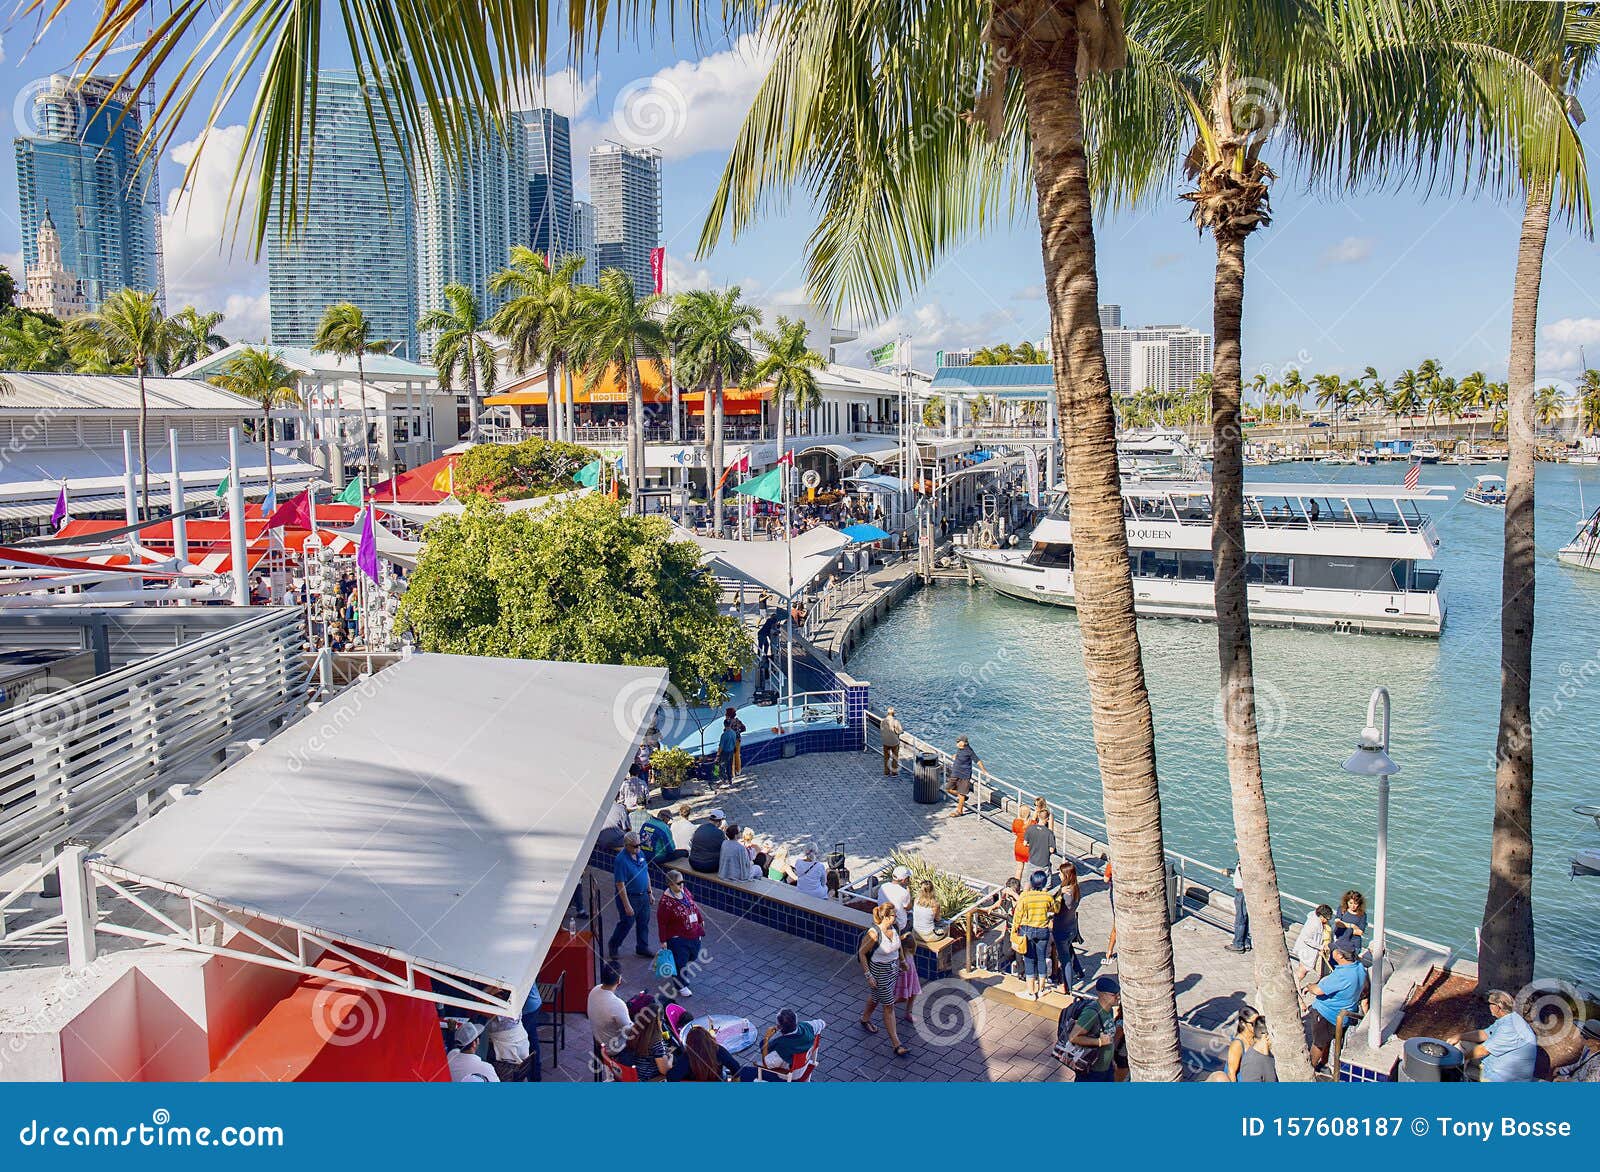 Bayside Marketplace Waterfront Exterior Miami Editorial Photography